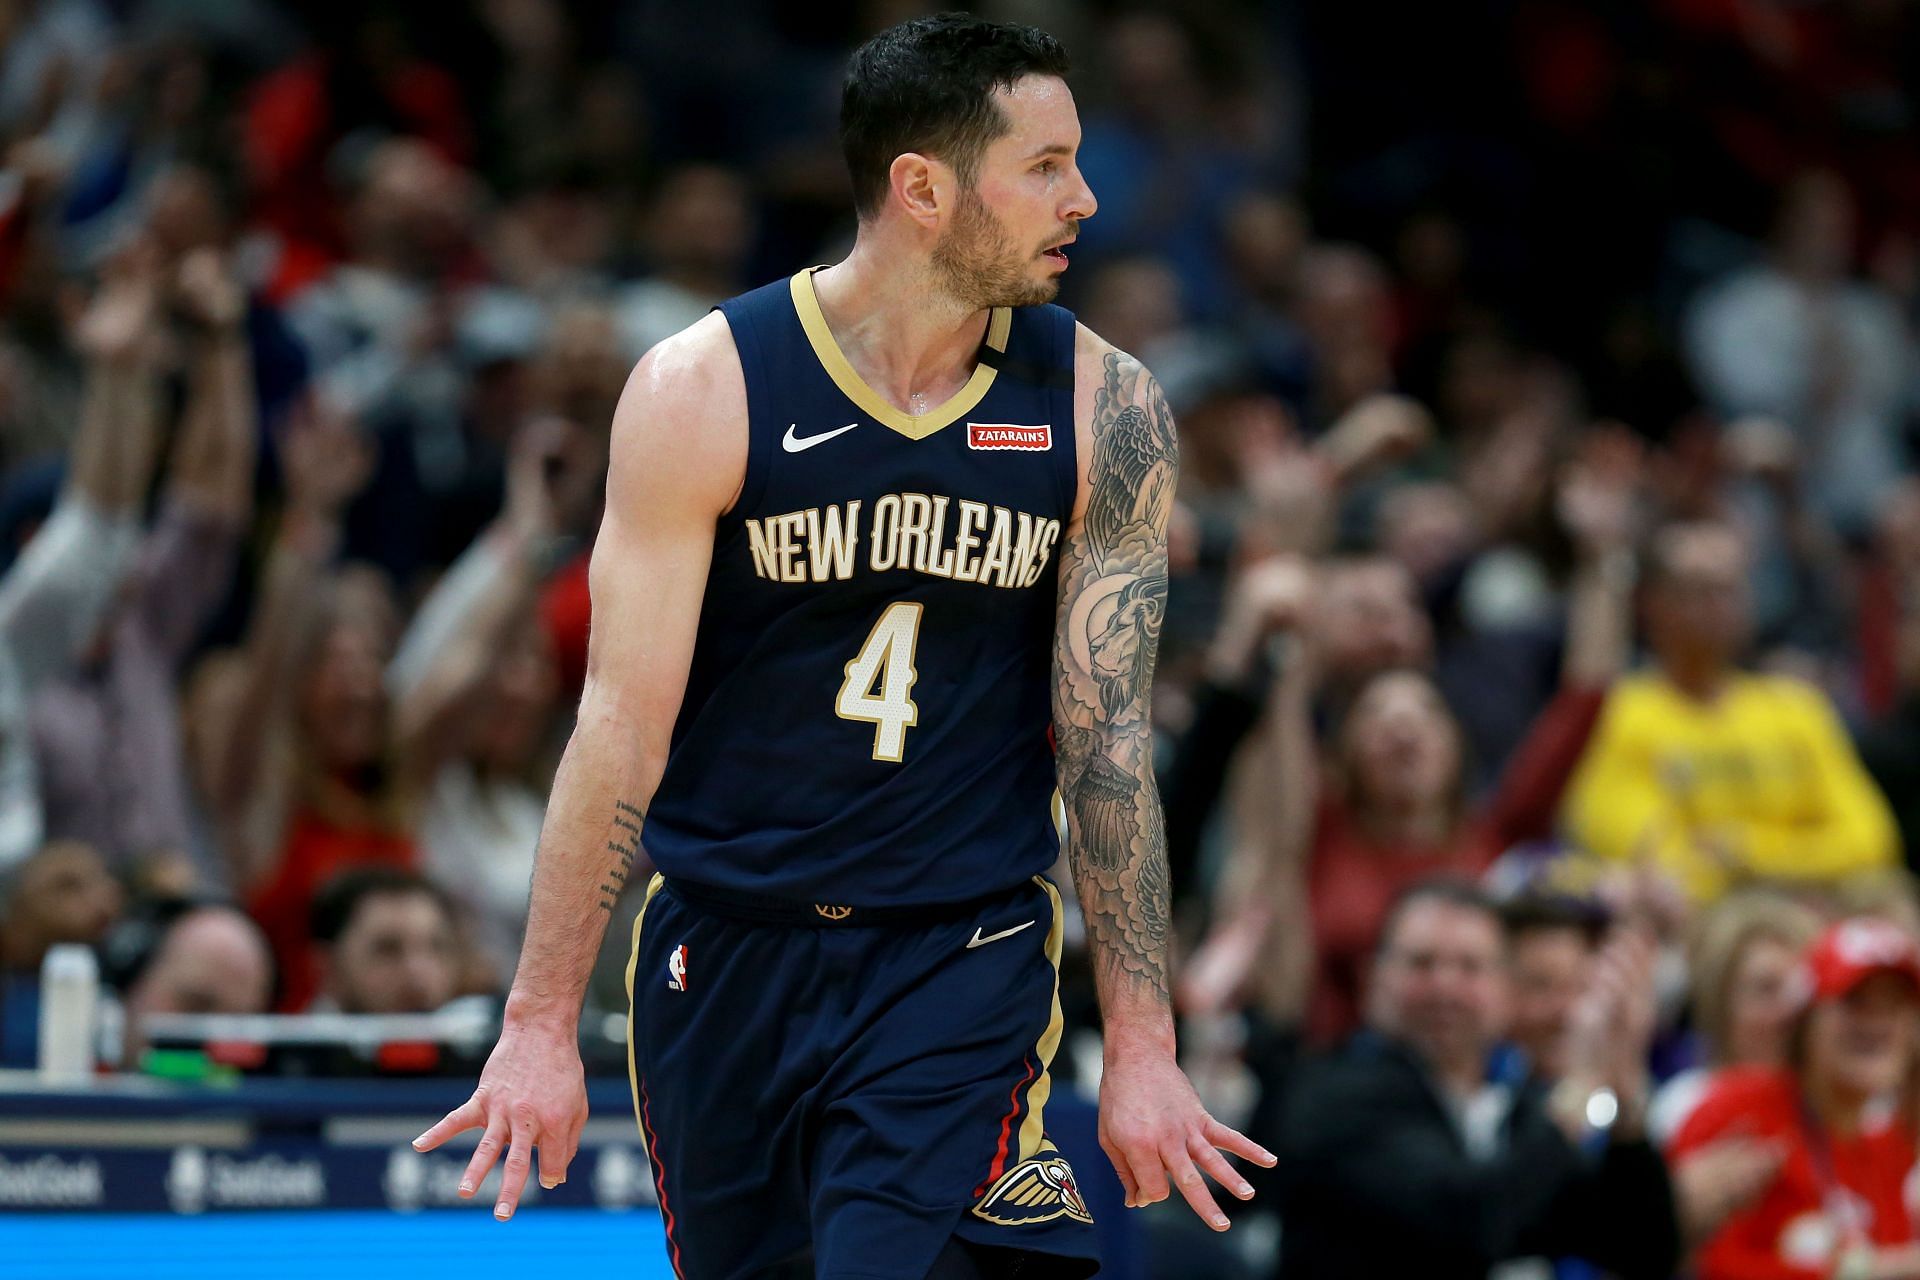 JJ Redick playing for the New Orleans Pelicans